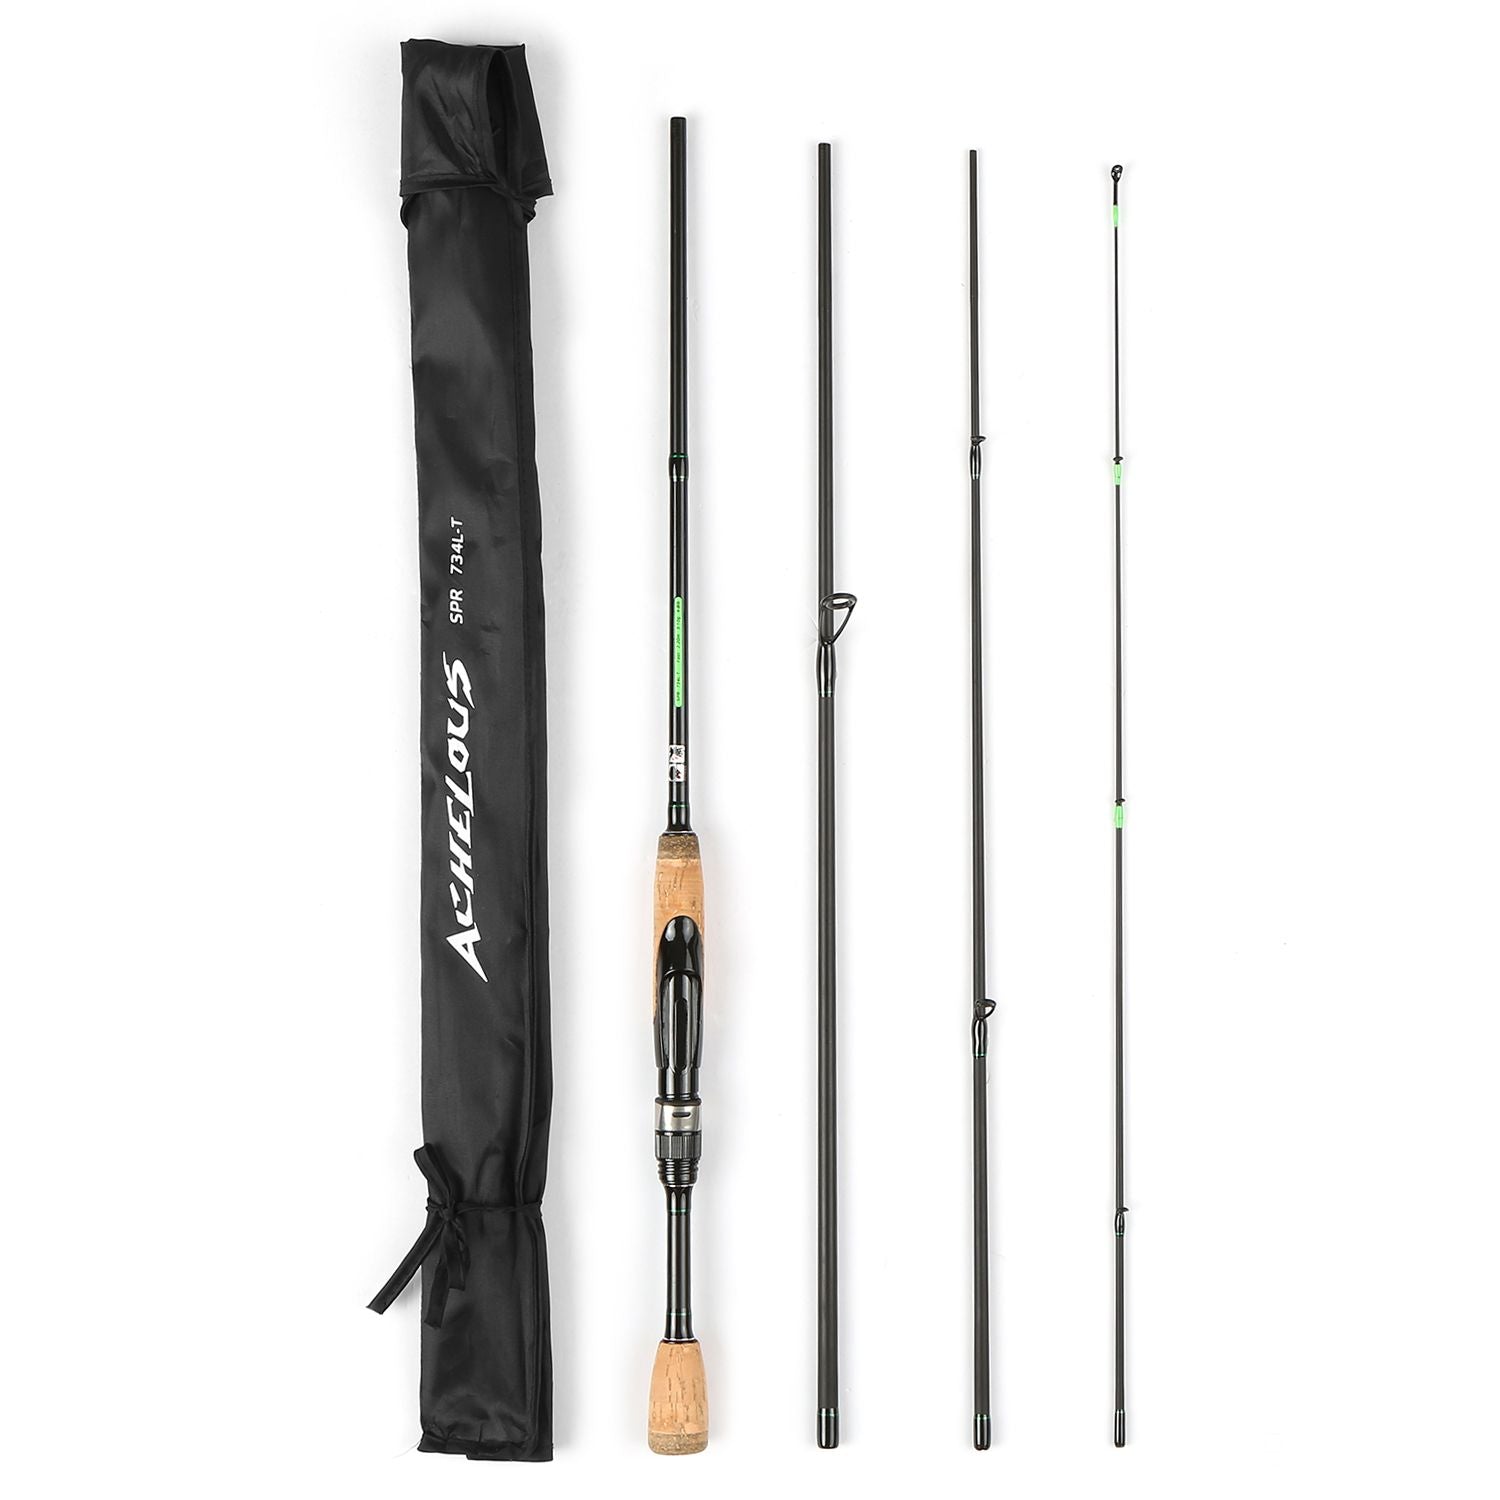 Portable Travel Spinning Fishing Rod Lightweight Carbon - 2.2m